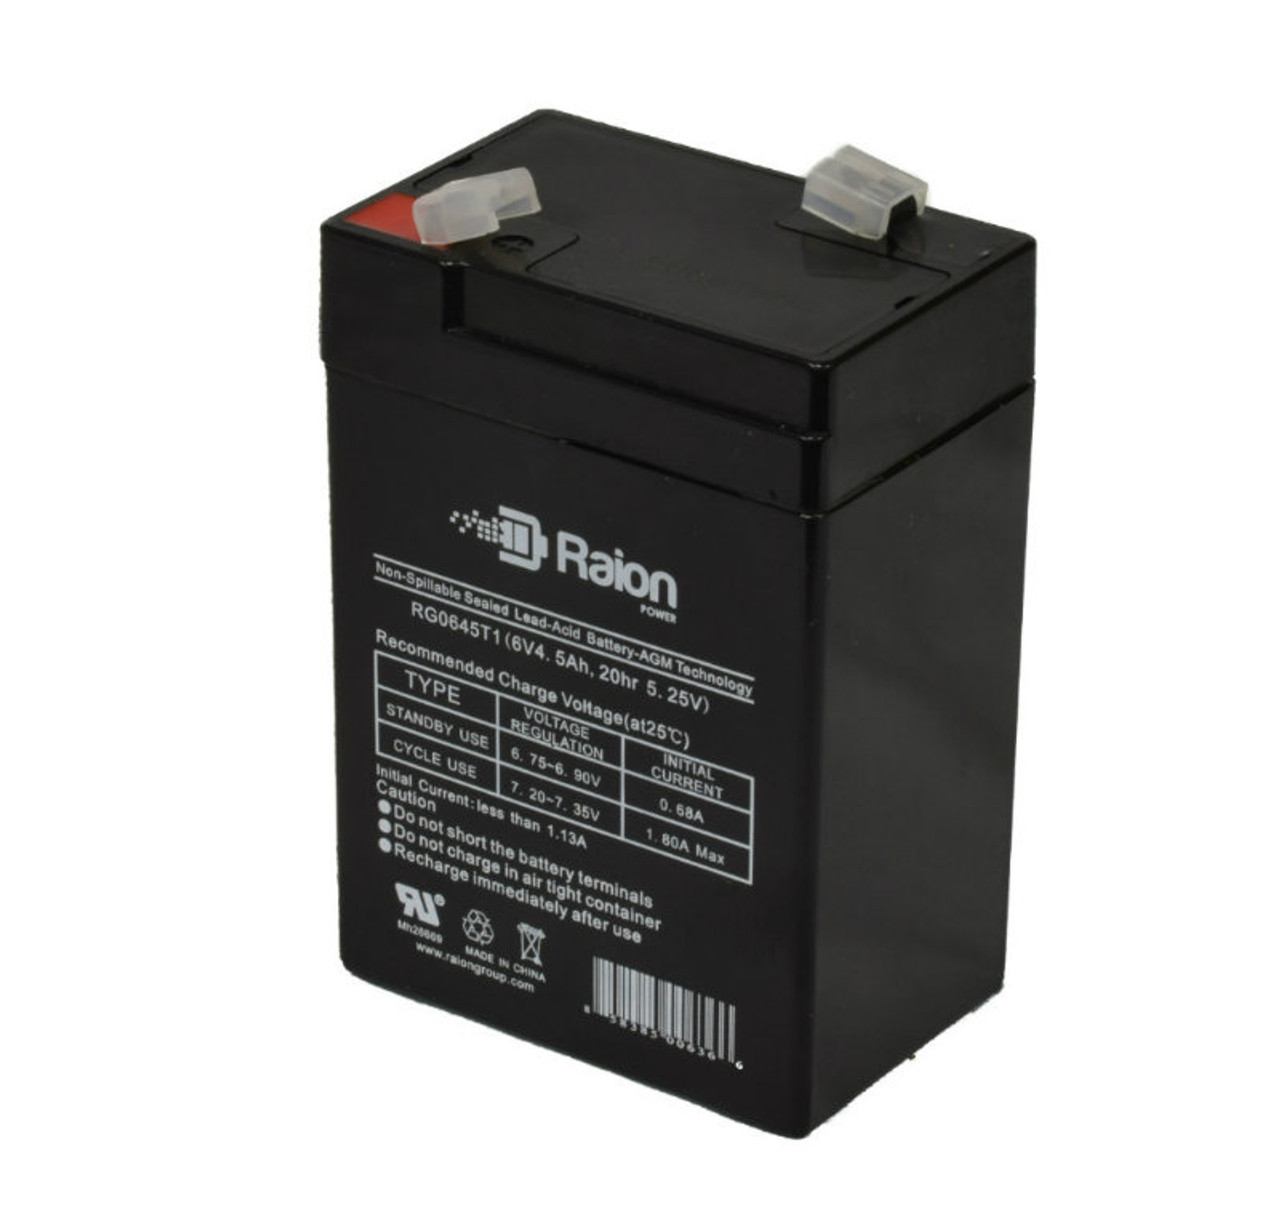 Raion Power RG0645T1 6V 4.5Ah Replacement Battery Cartridge for Technacell EP1640